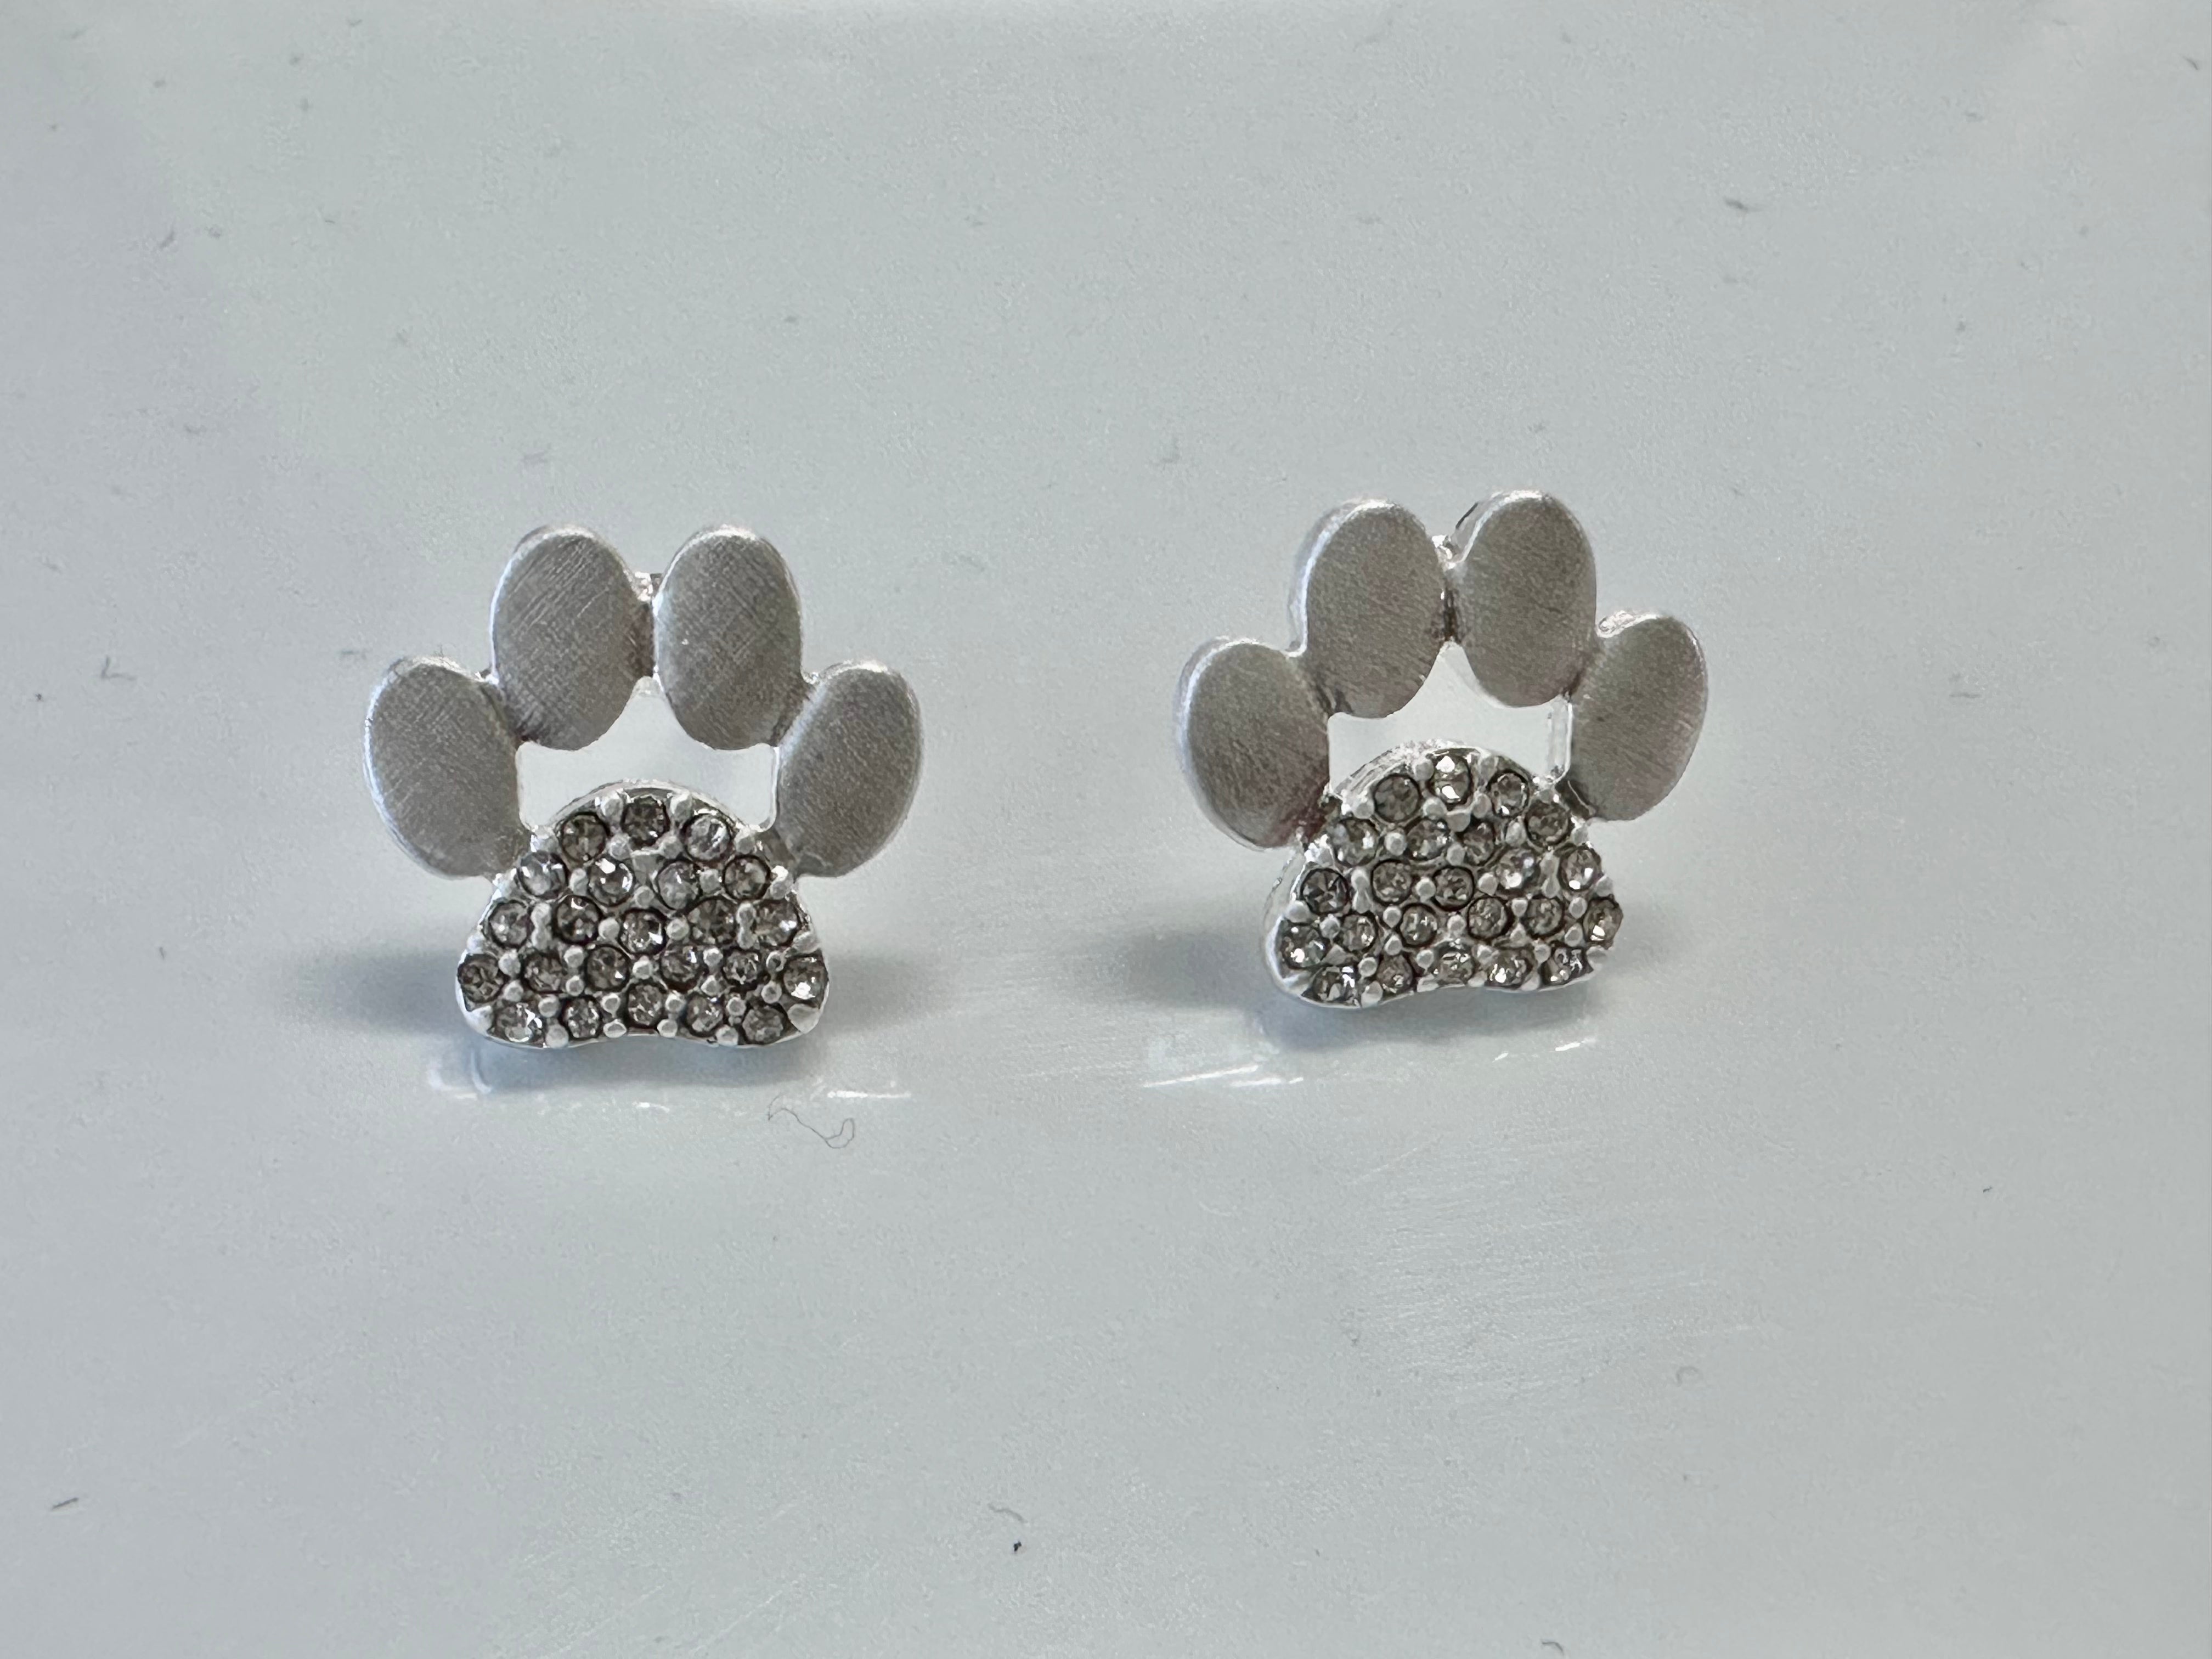 Badger Paw Silver with Bling Stud Earrings